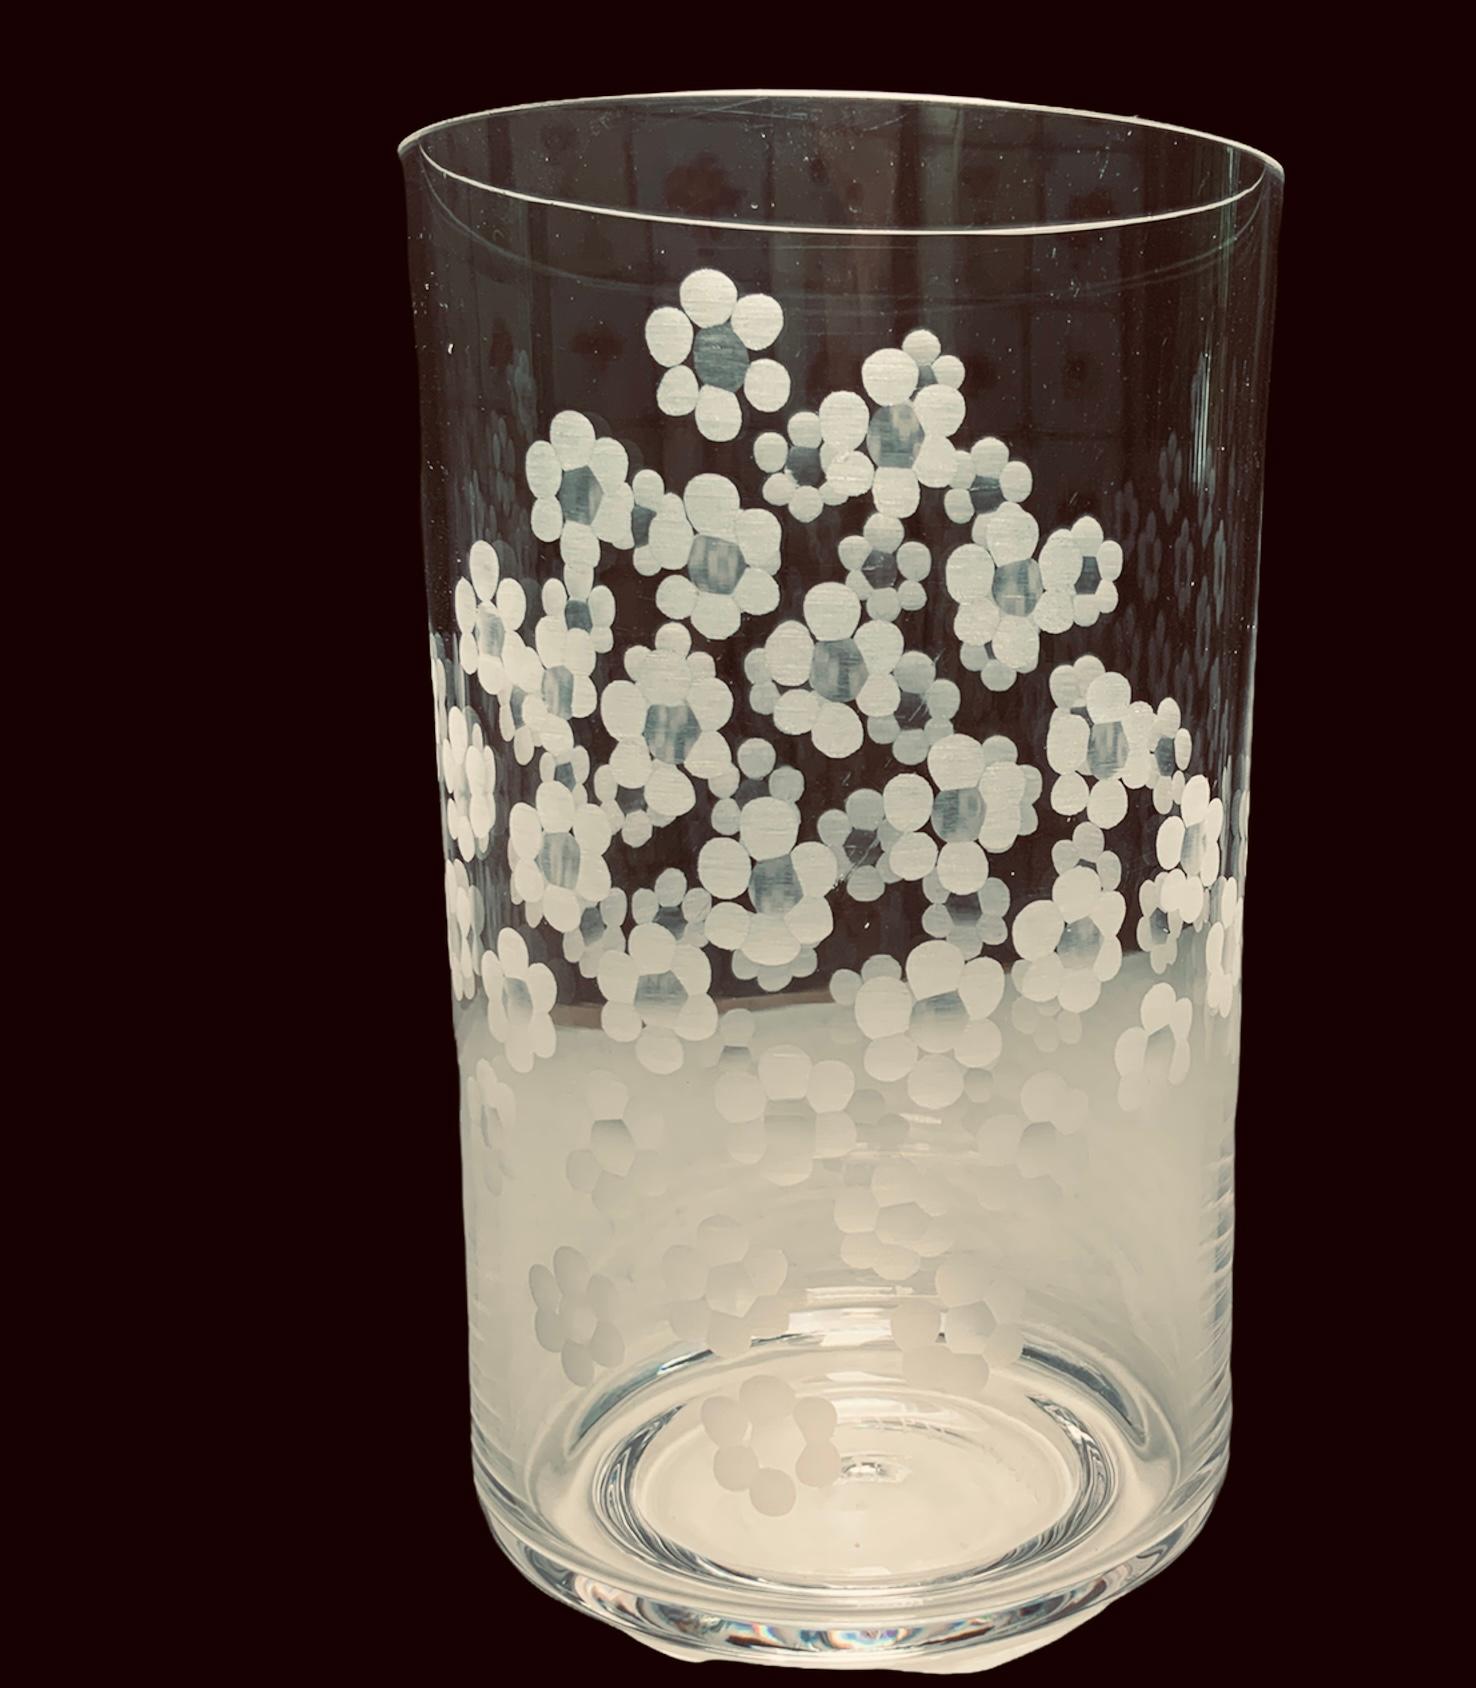 This is a clear crystal cylindrical shaped vase. It is decorated with multiple flowers etched in the center of it. Under the base is an acid etched signature-MR or MB with some numbers.